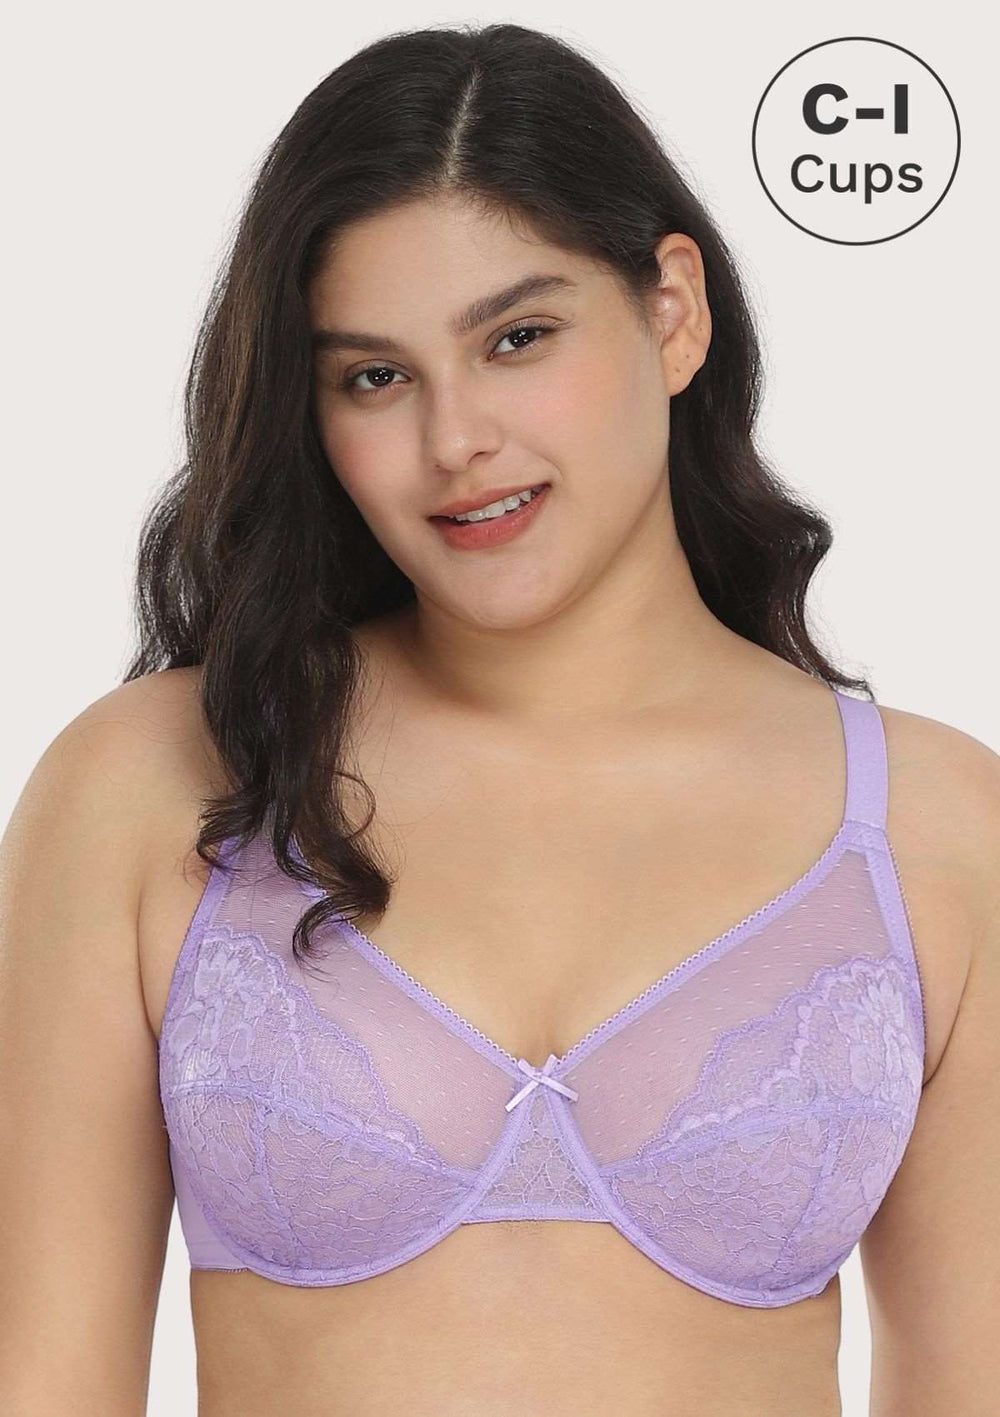 HSIA Gladioli Lace and Mesh Unlined Underwire Bra and Panty Set